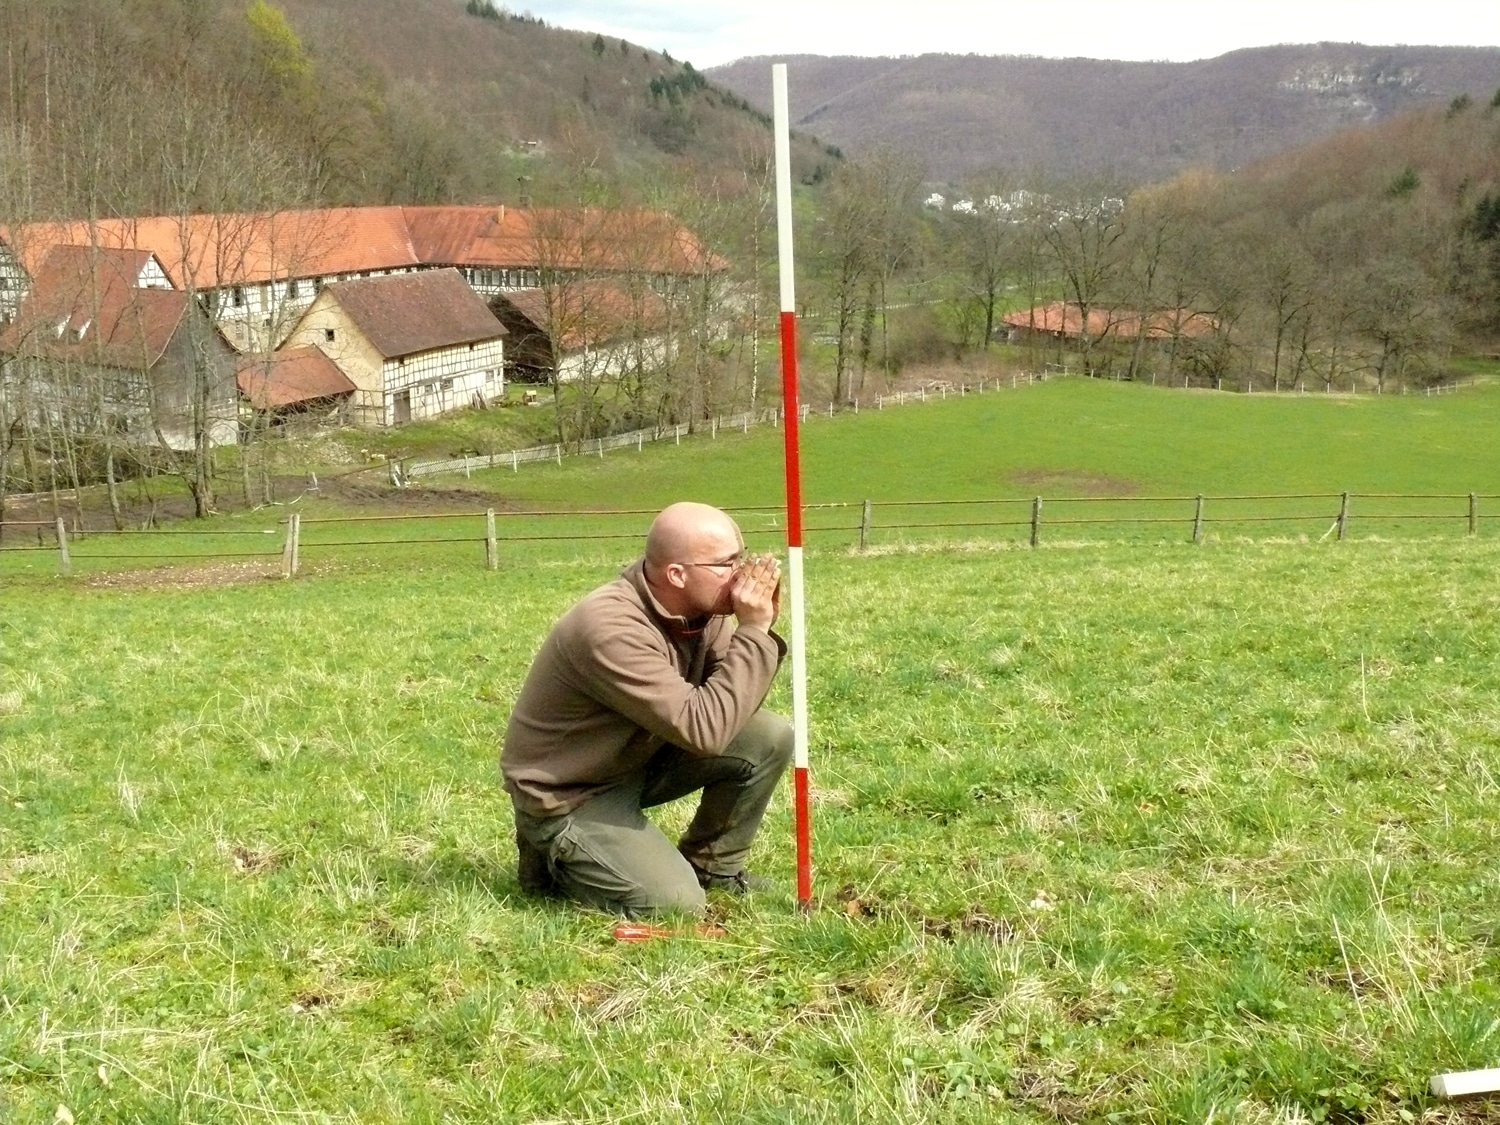 Picture: The photo shows a man kneeling on a meadow next to a red and white striped so-called alignment rod, which is needed for measuring small partial areas of the experimental plots. A farmstead and mountains can be seen in the background.